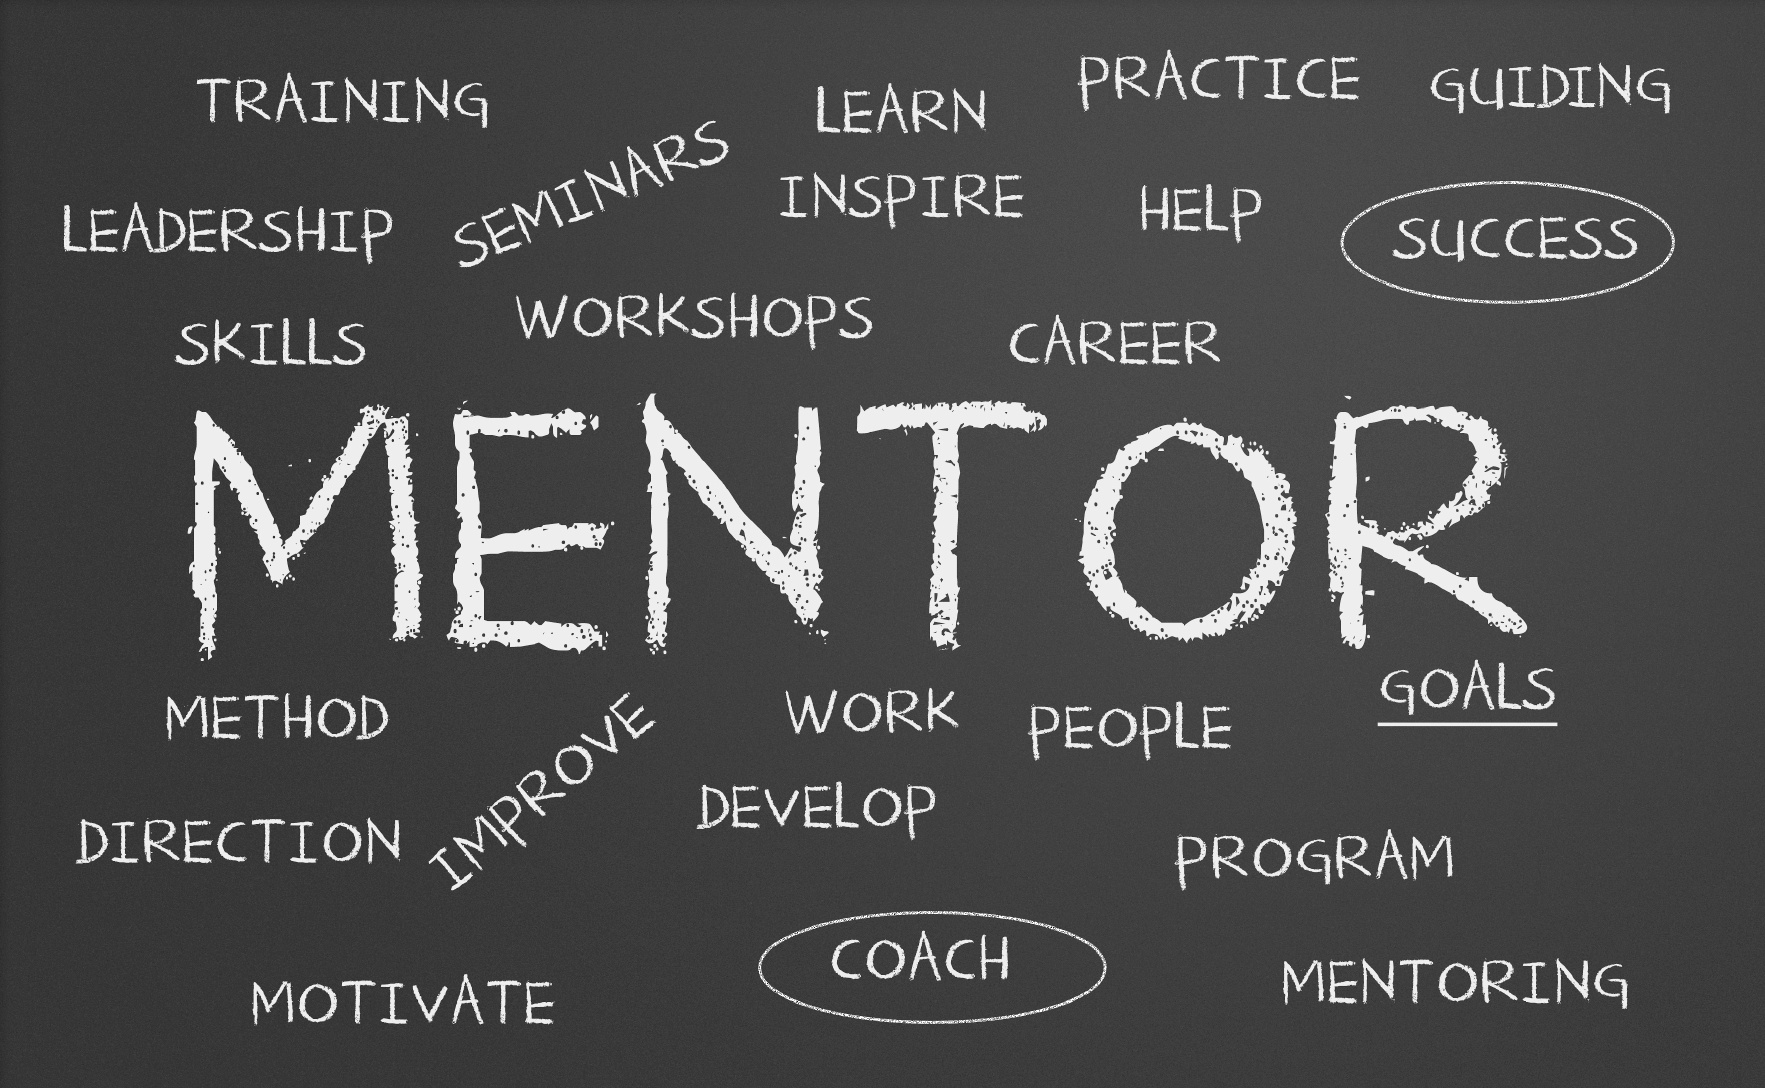 20 per cent of learning comes from being mentored by management. 